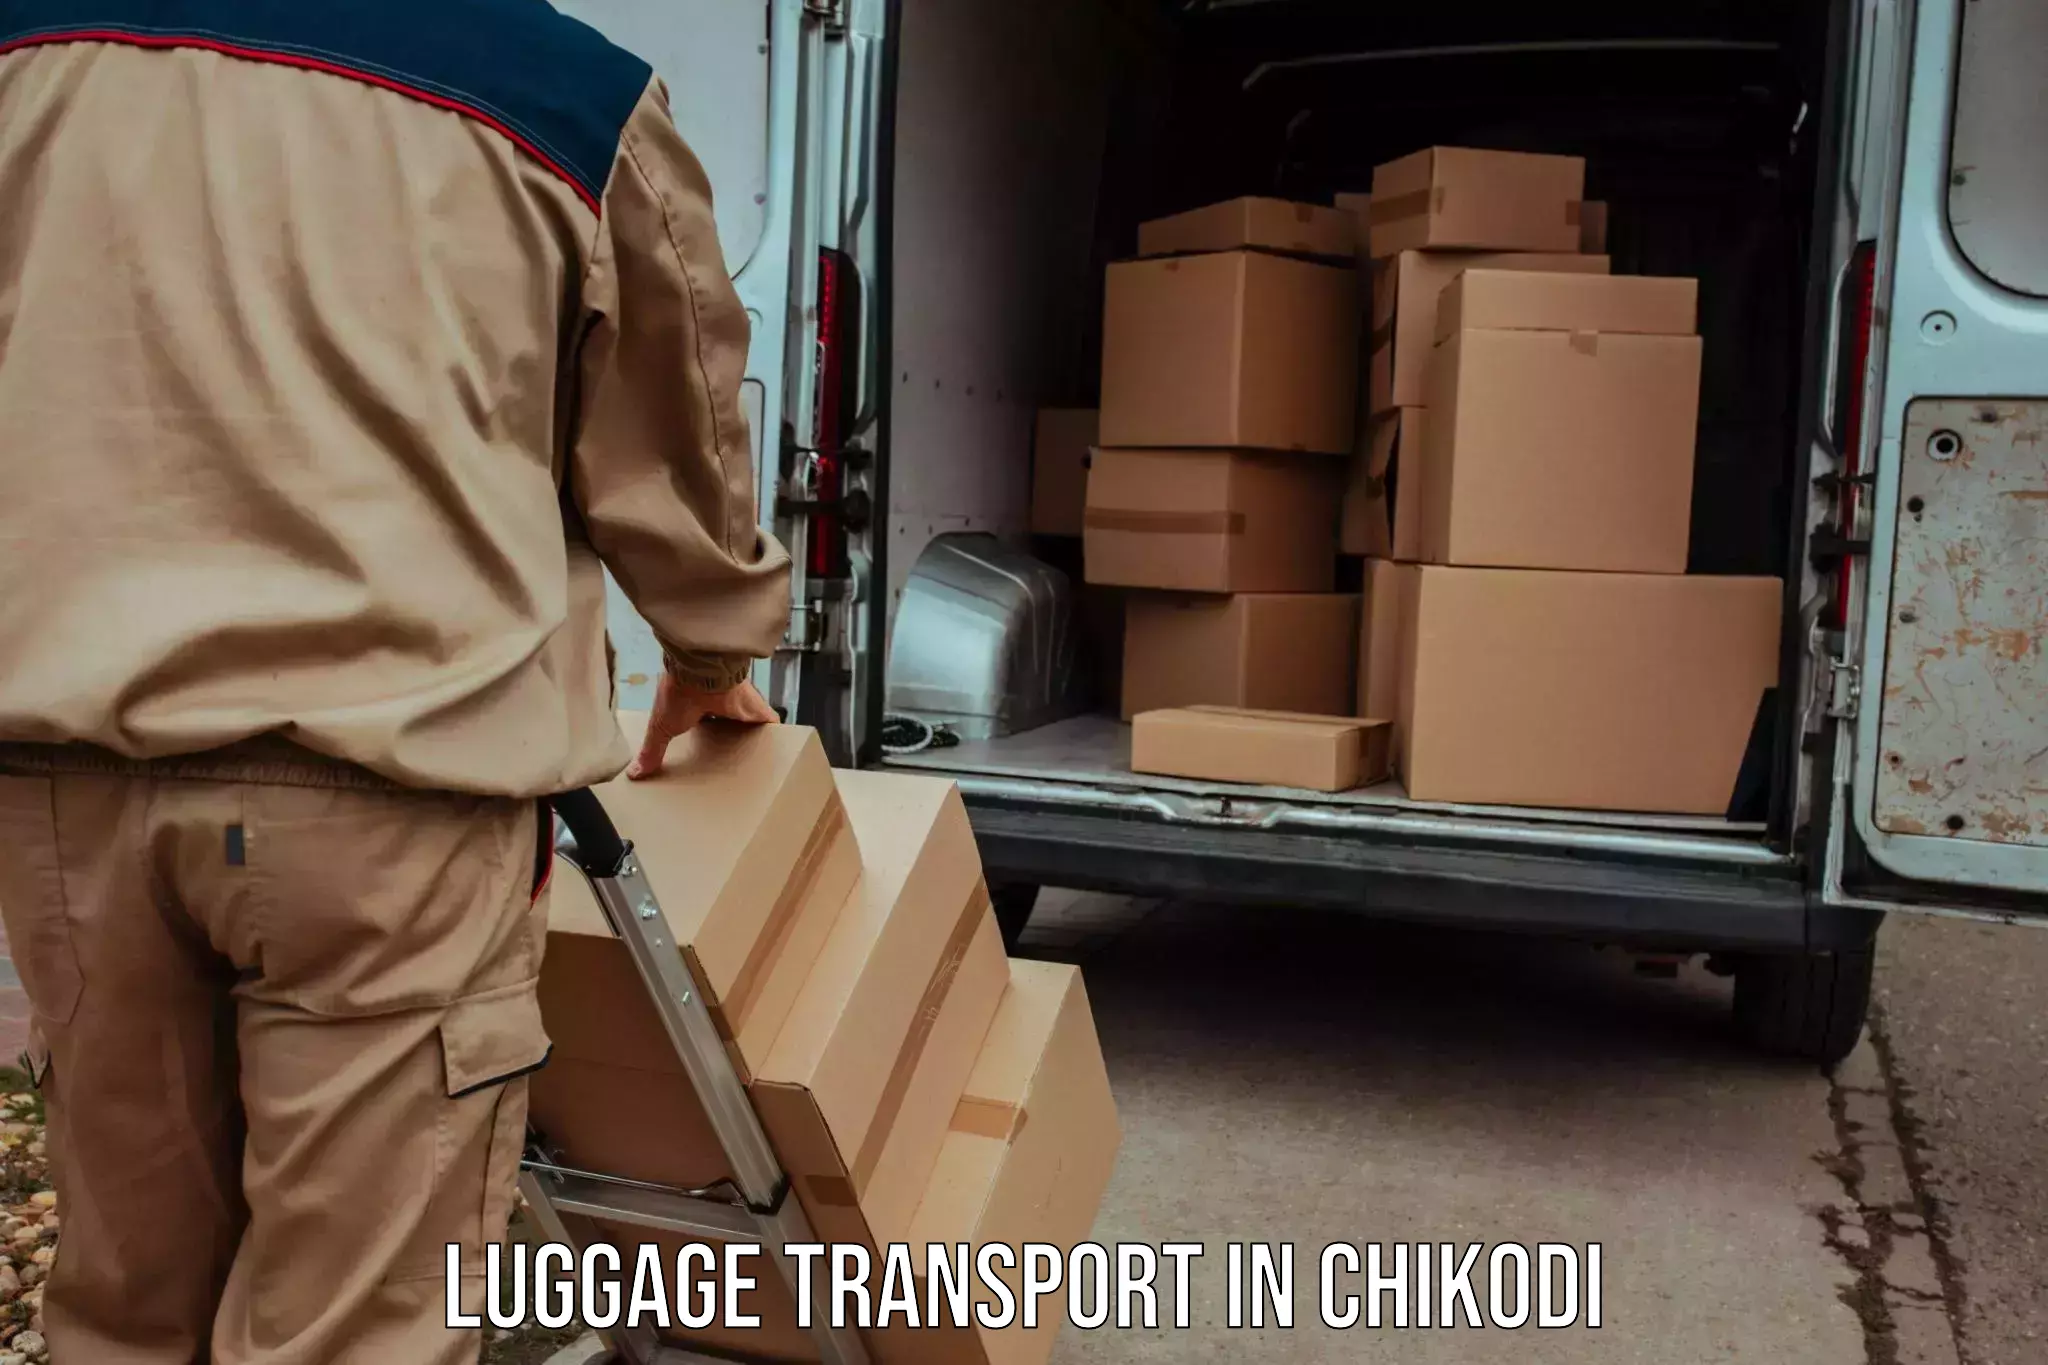 Luggage delivery logistics in Chikodi